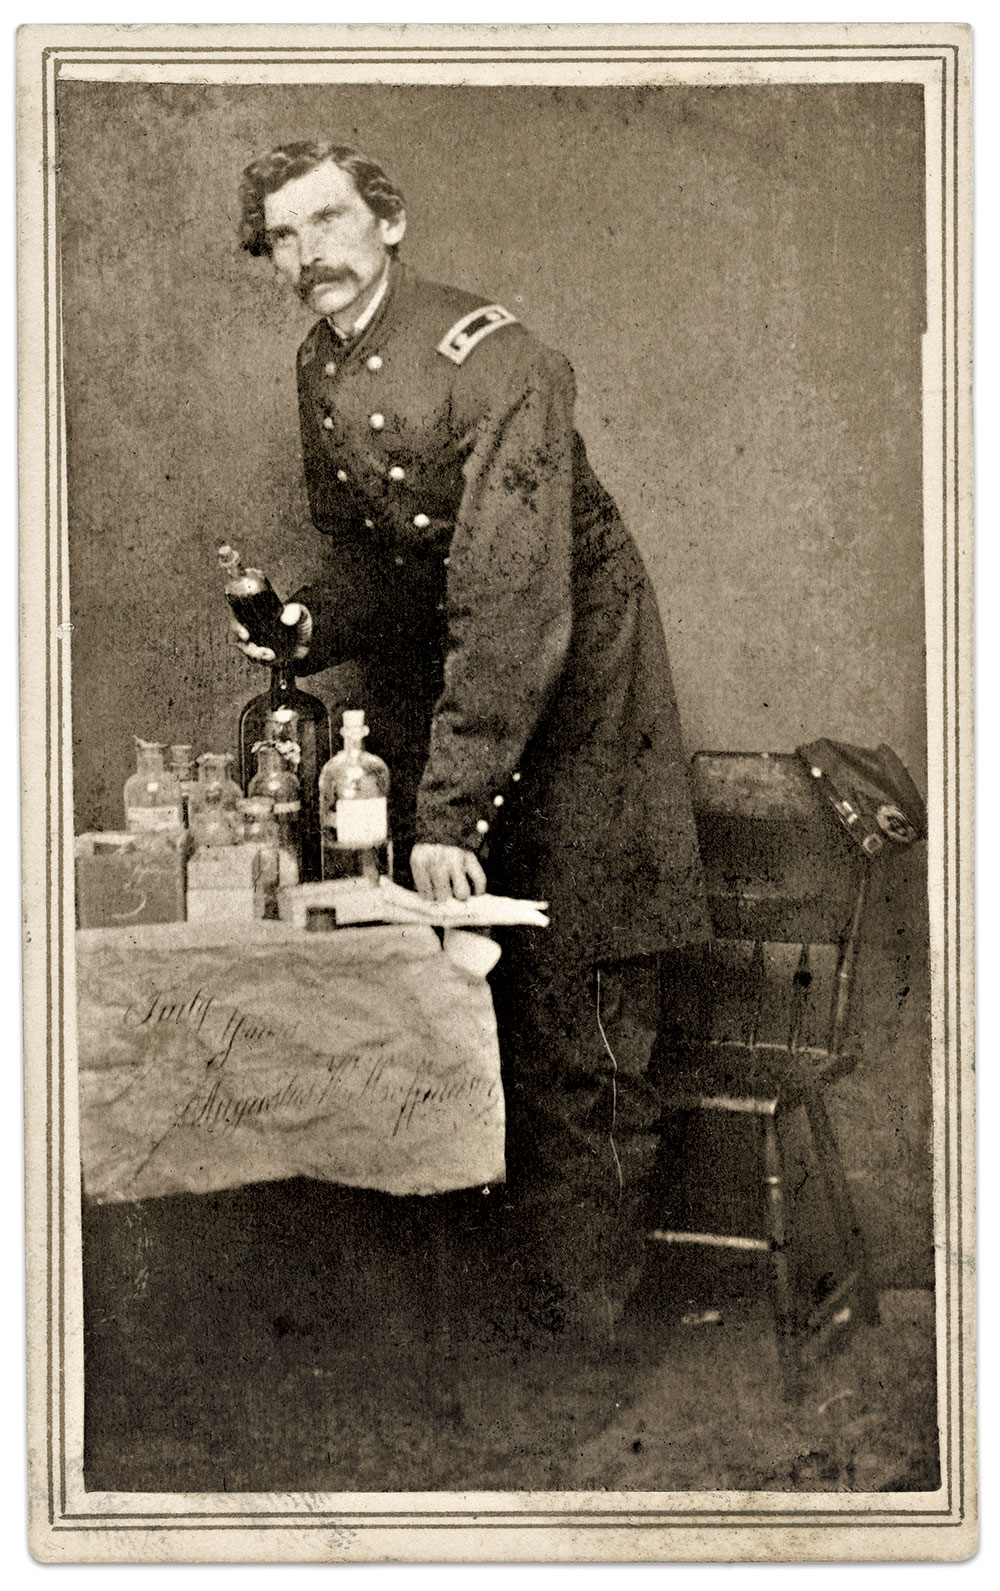 Carte de visite by William H. Phares of Fort Madison,Iowa. John Wernick Collection.